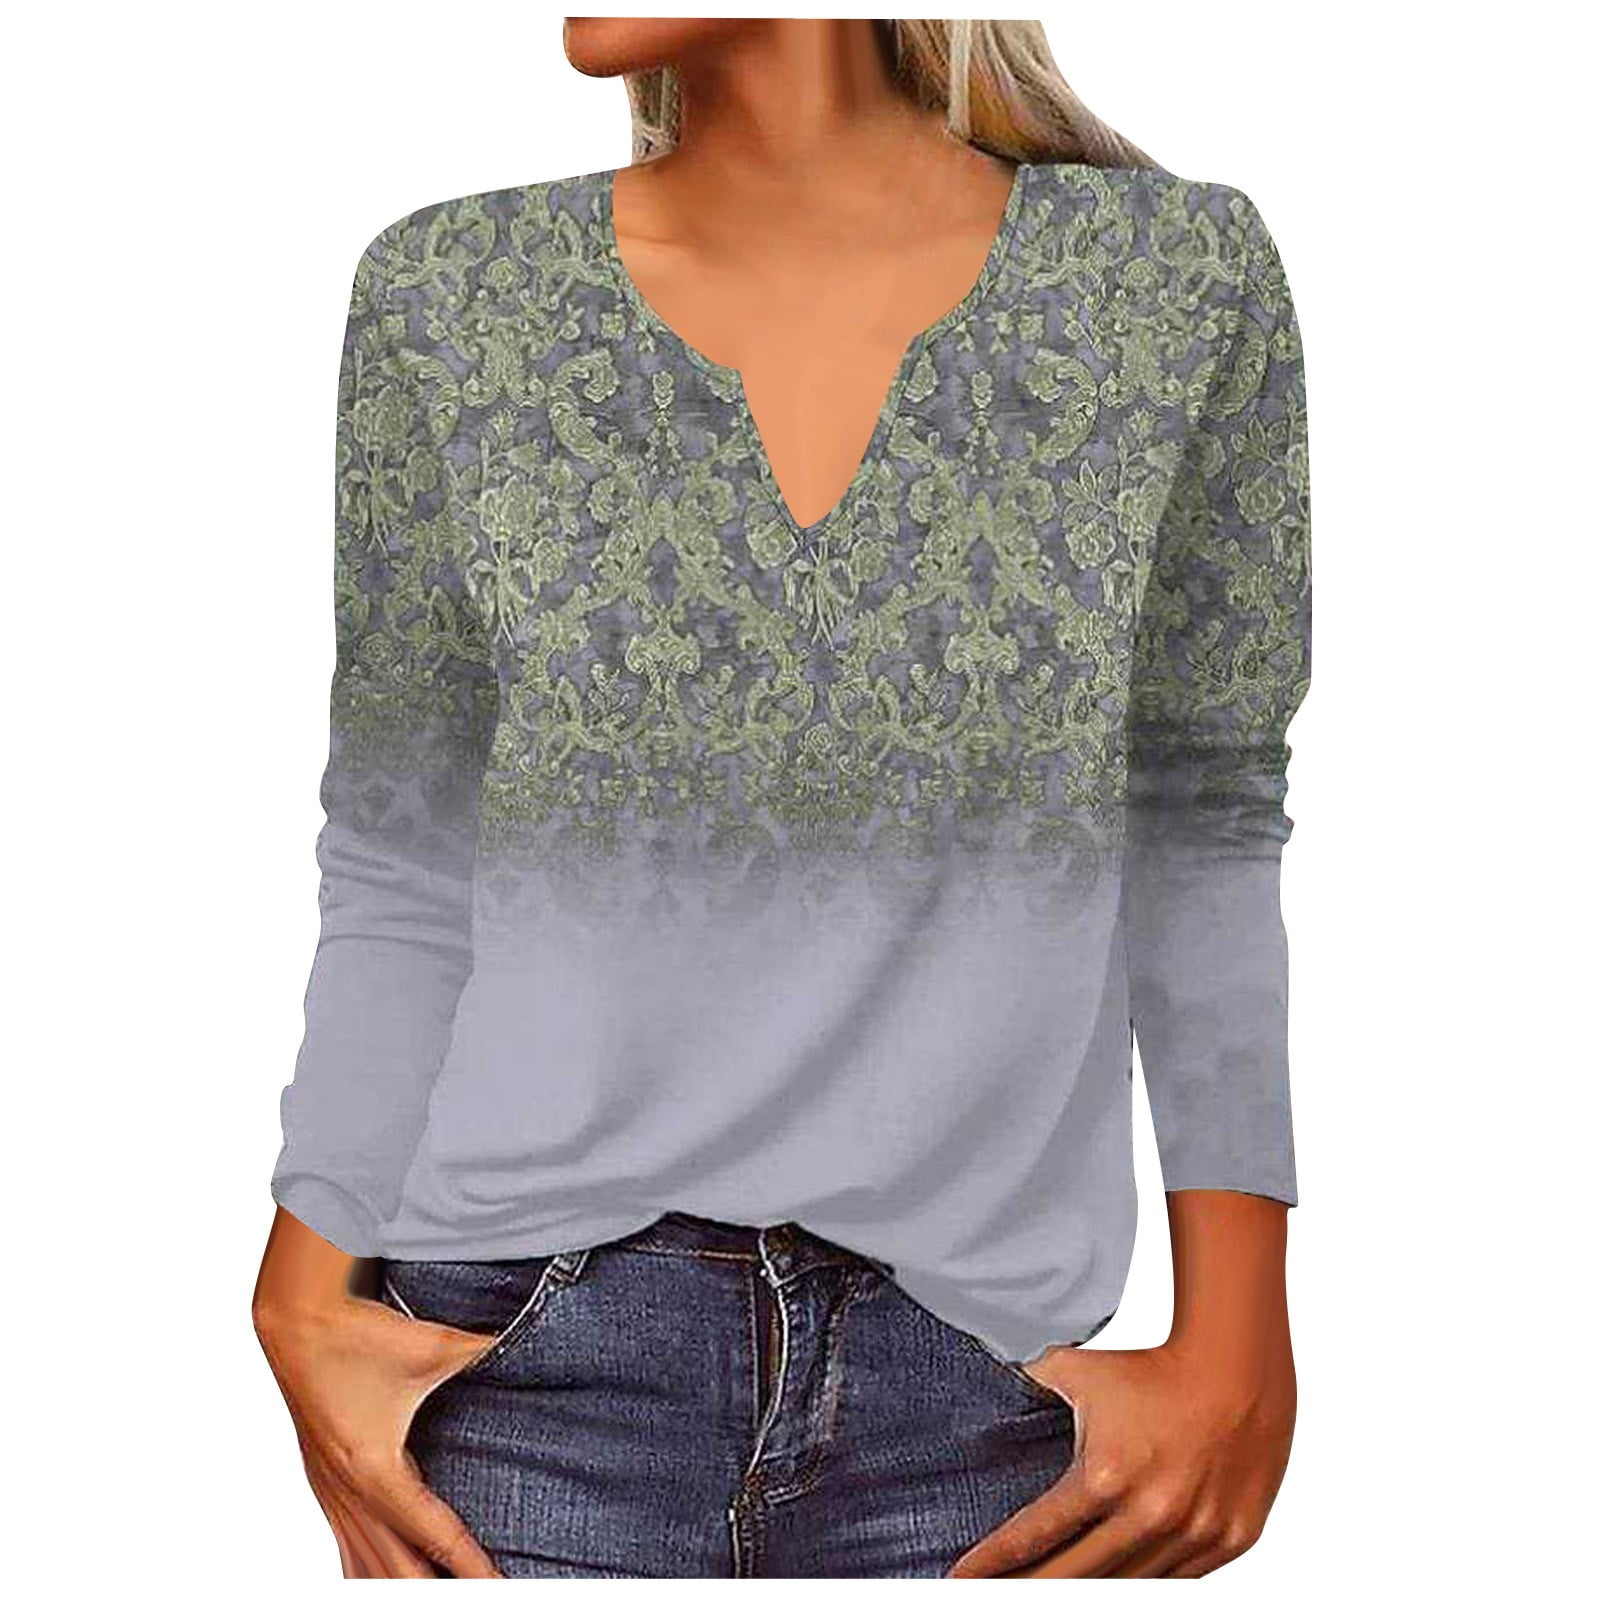 Mlqidk Women's Plus Size Tops Boho Western Vintage Ethnic Floral Printed  Henley Blouse V Neck Button Front Long Sleeve Casual Shirt,Wine XXL 